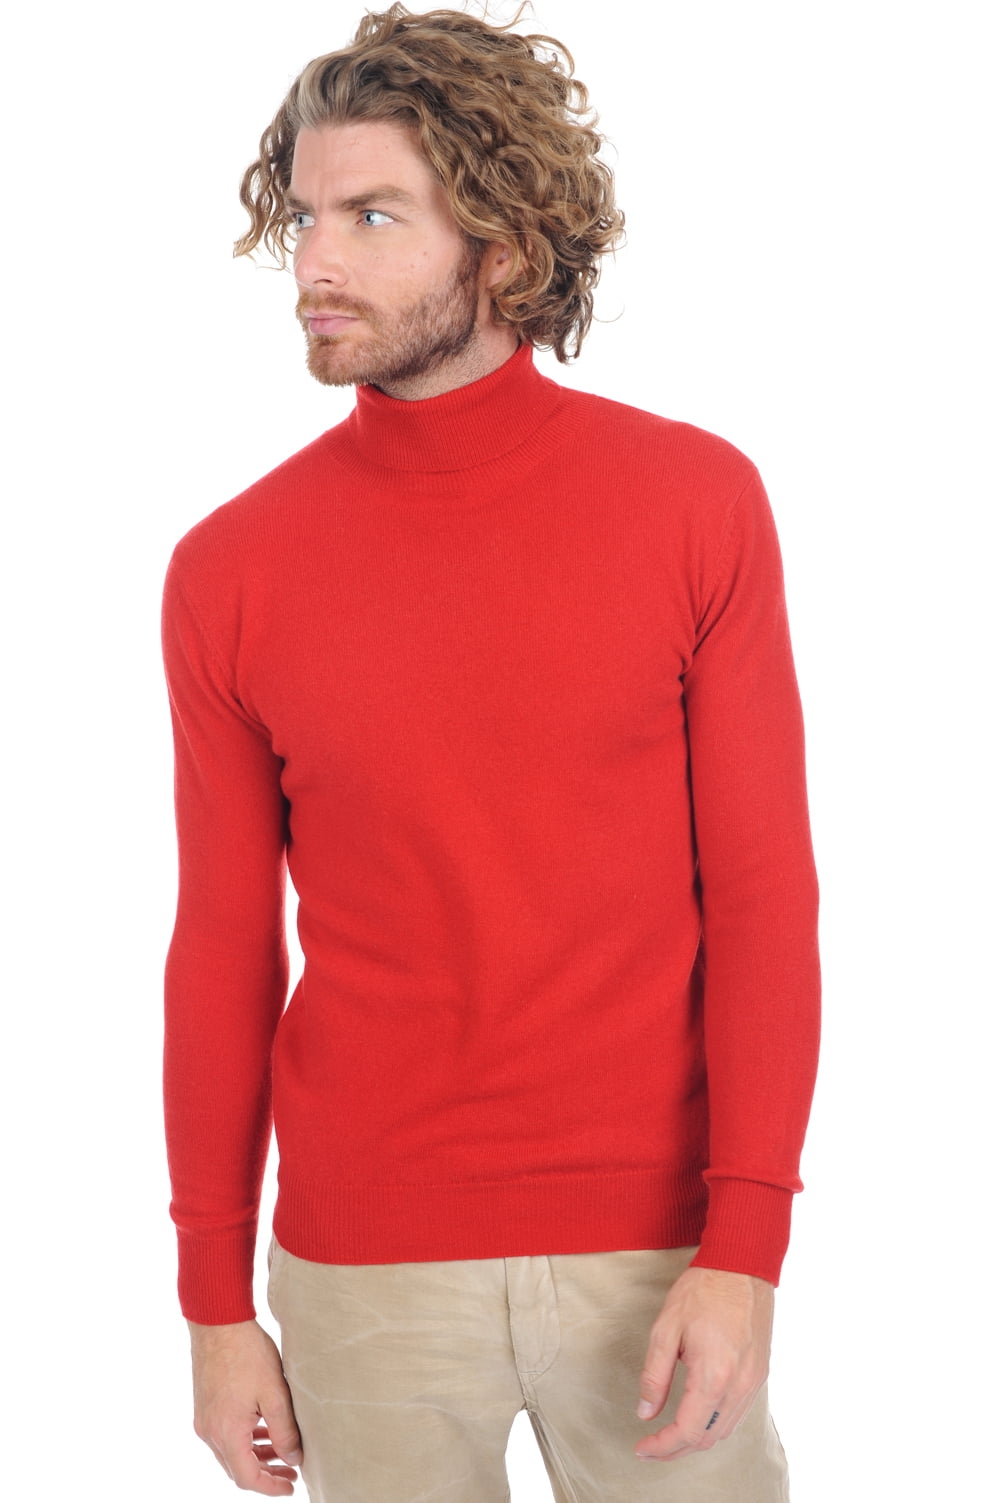 Cashmere men roll neck tarry first ultra red s